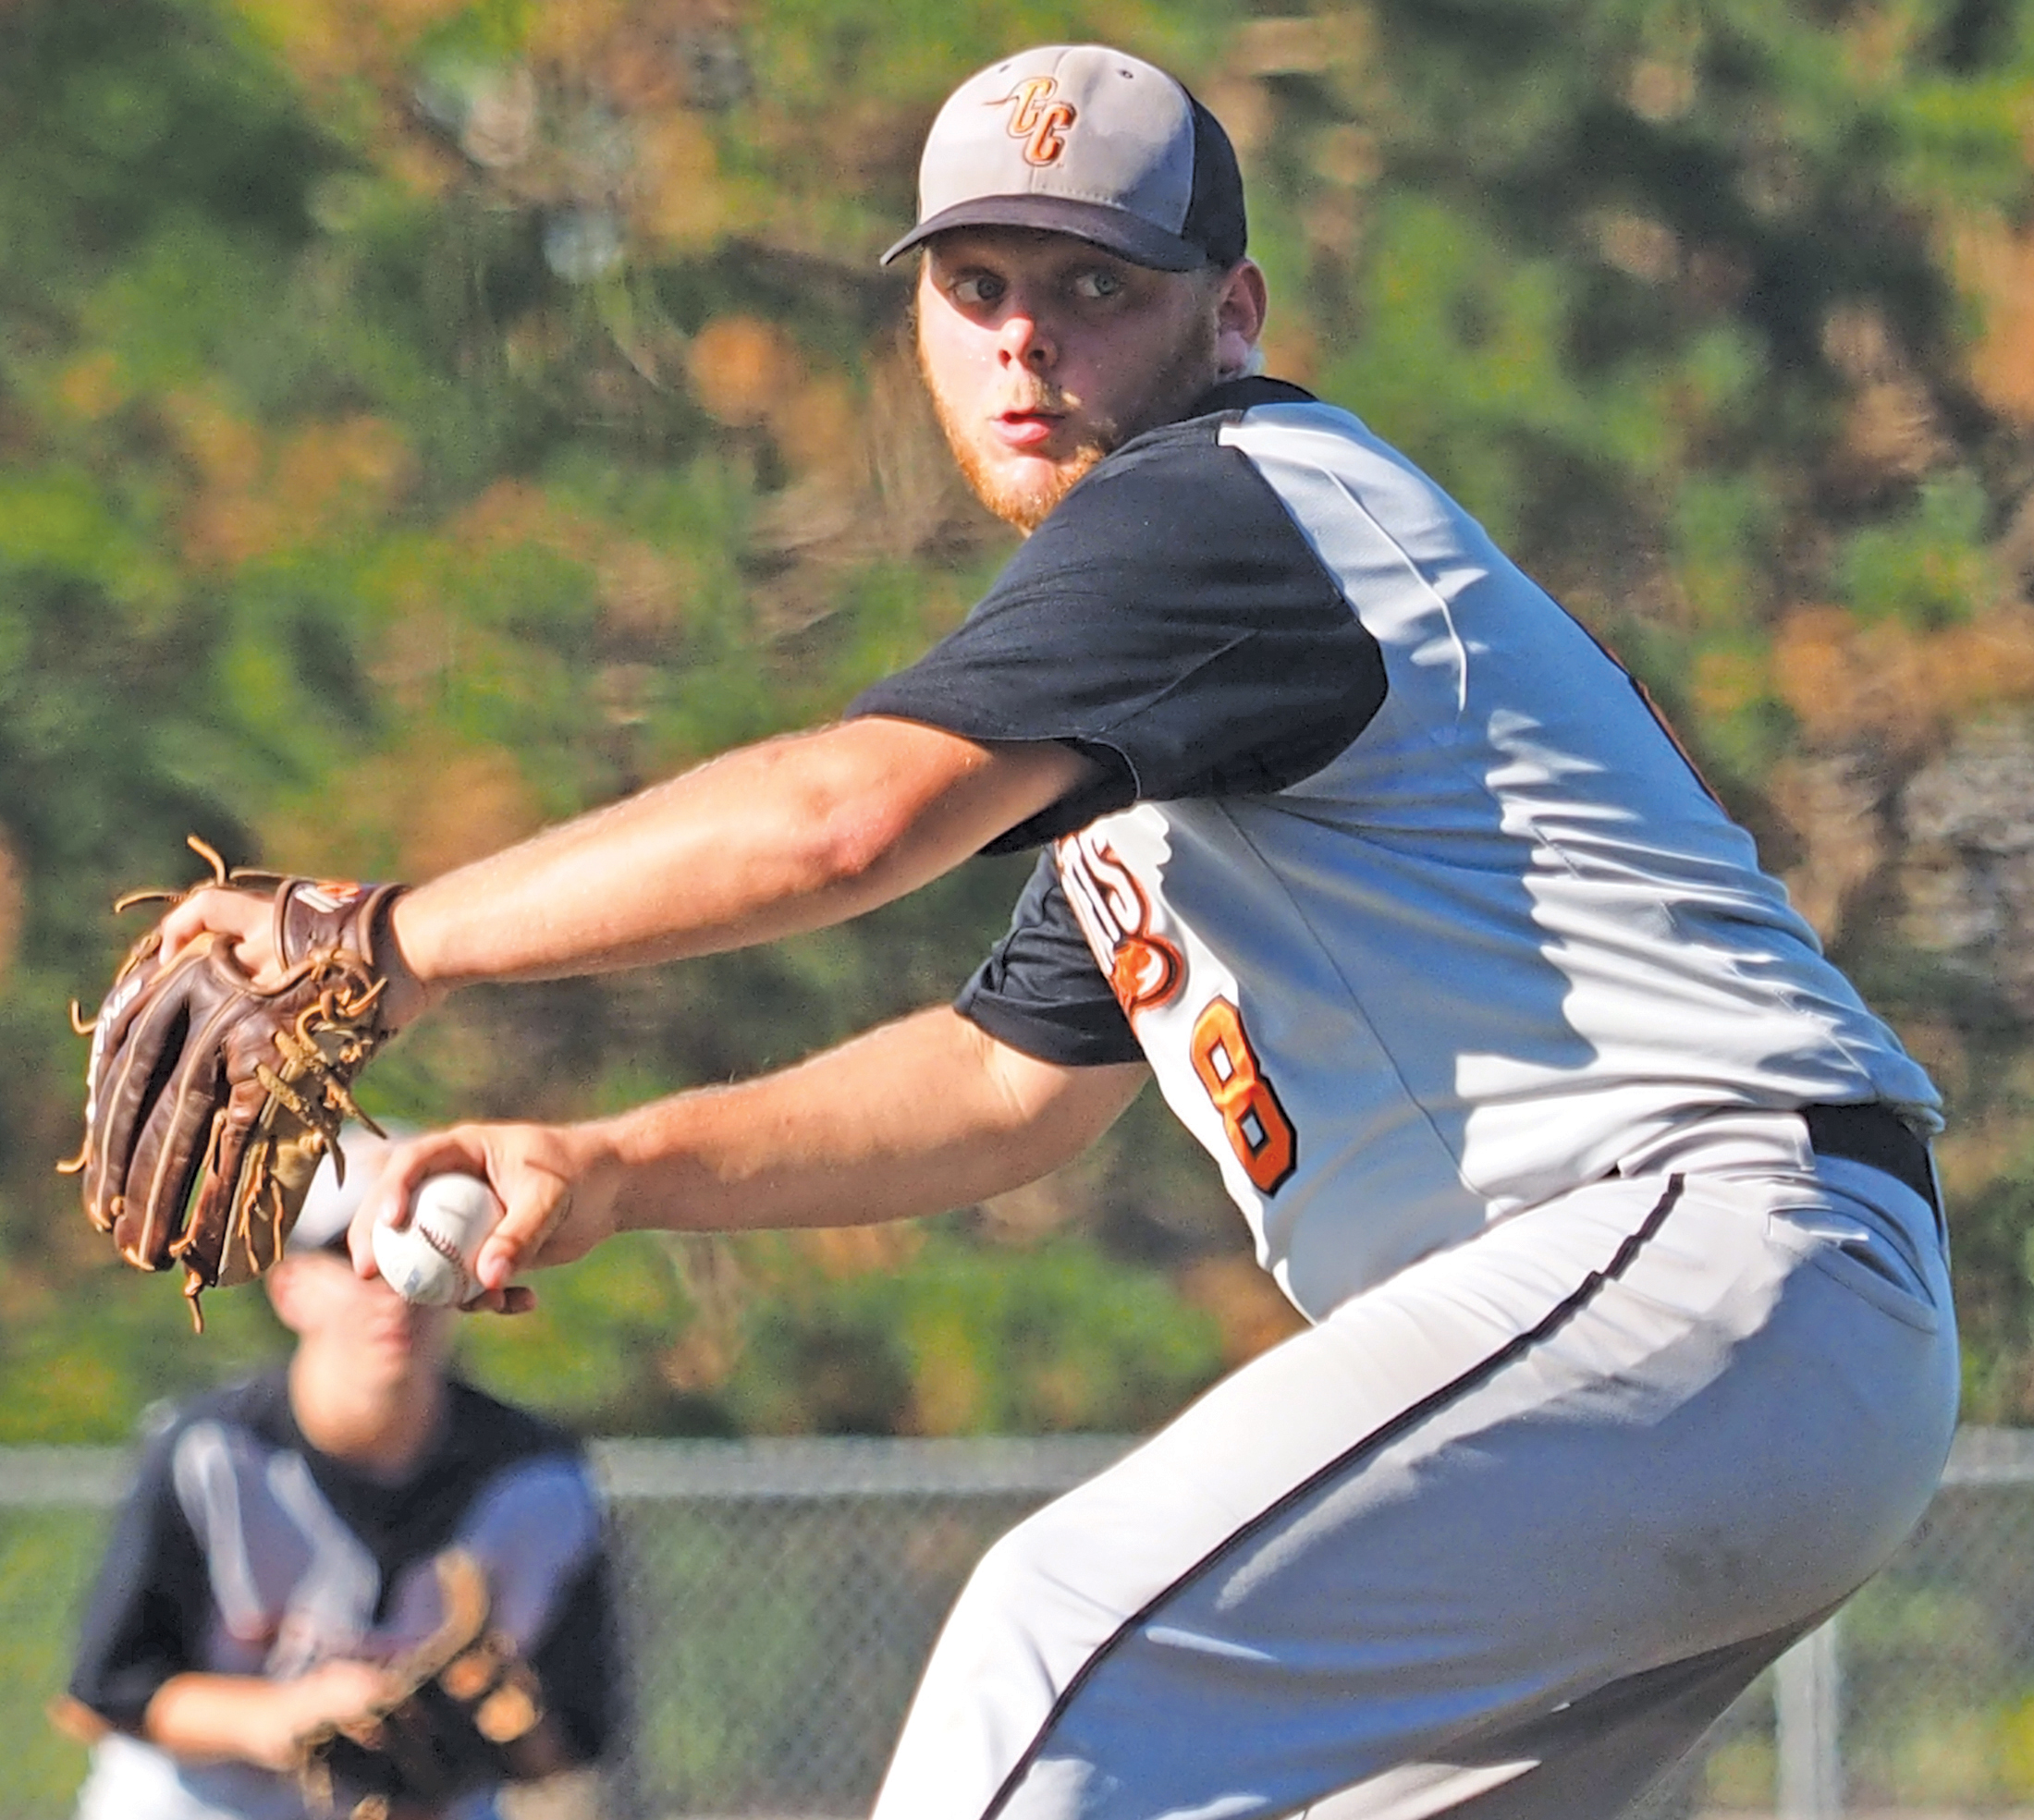 Mitchell, Arndt named to All-NEIC baseball teams